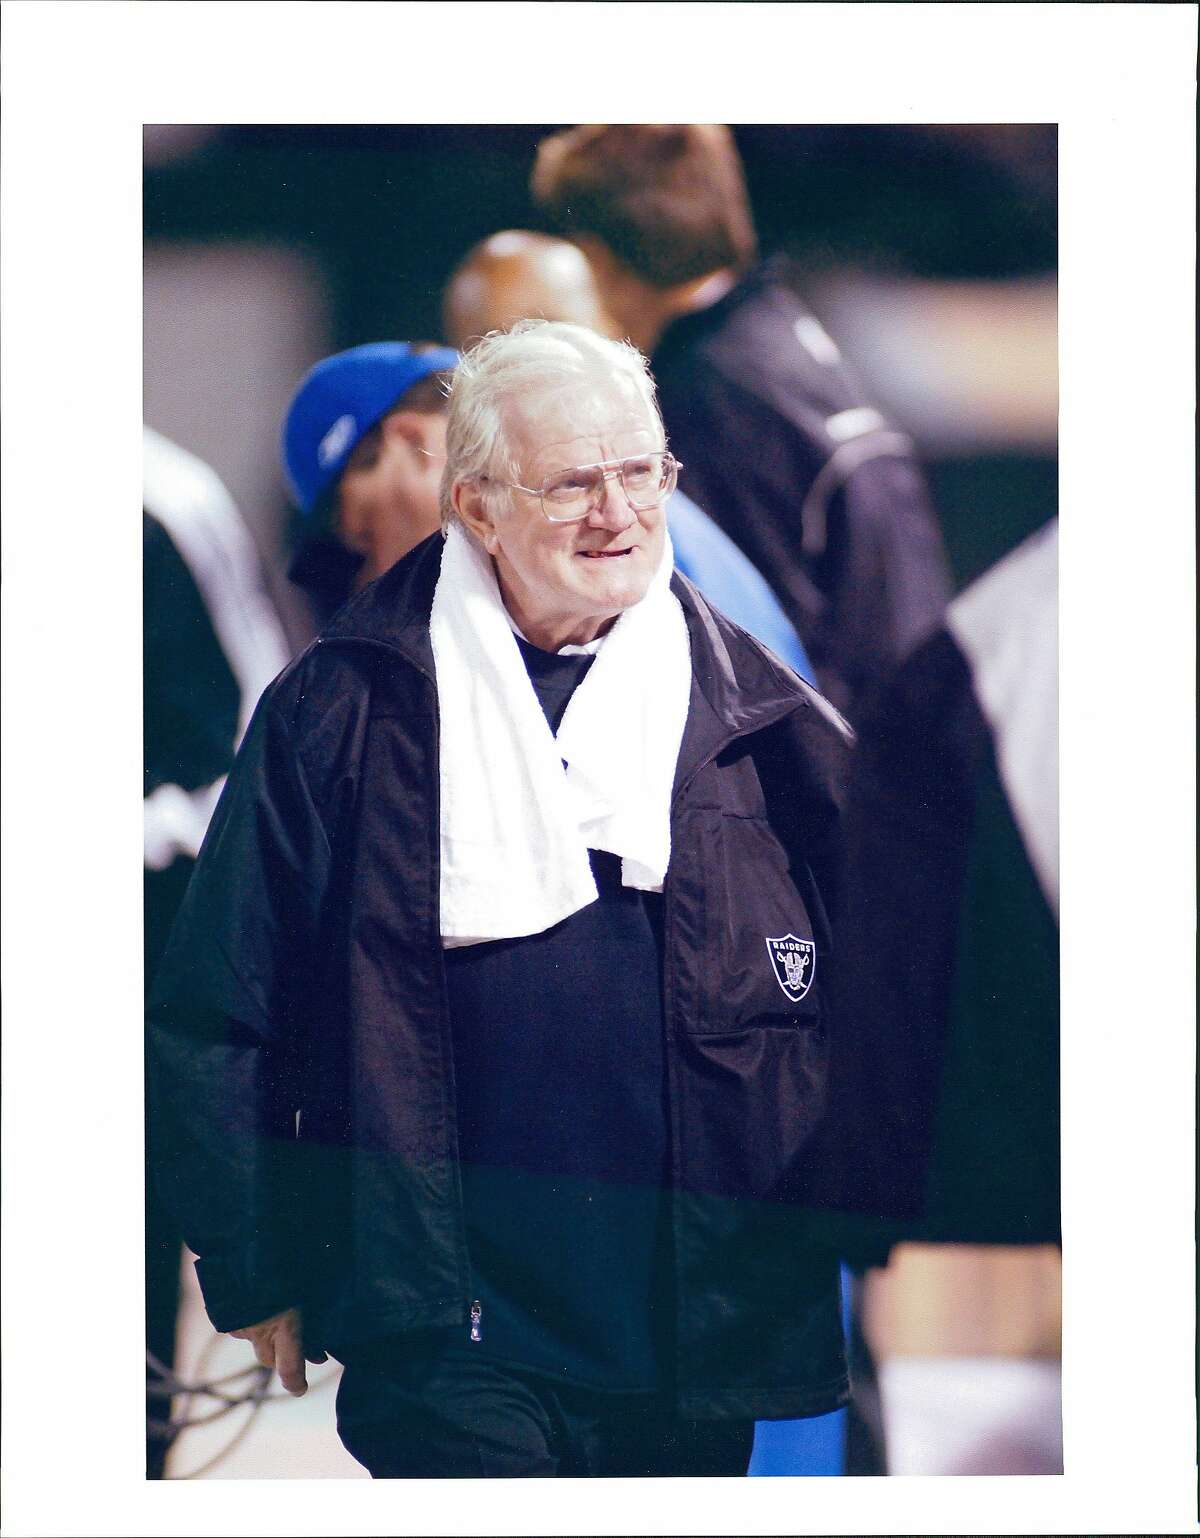 Longtime equipment manager Richard "Dick" Romanski died on Nov. 9, 2015. He was the team's original equipment manager and was followed by his son, Bobby. The two have been the only equipment managers in team history. Richard Romanski Equipment manager of The Oakland Raiders on the sideline during a game.